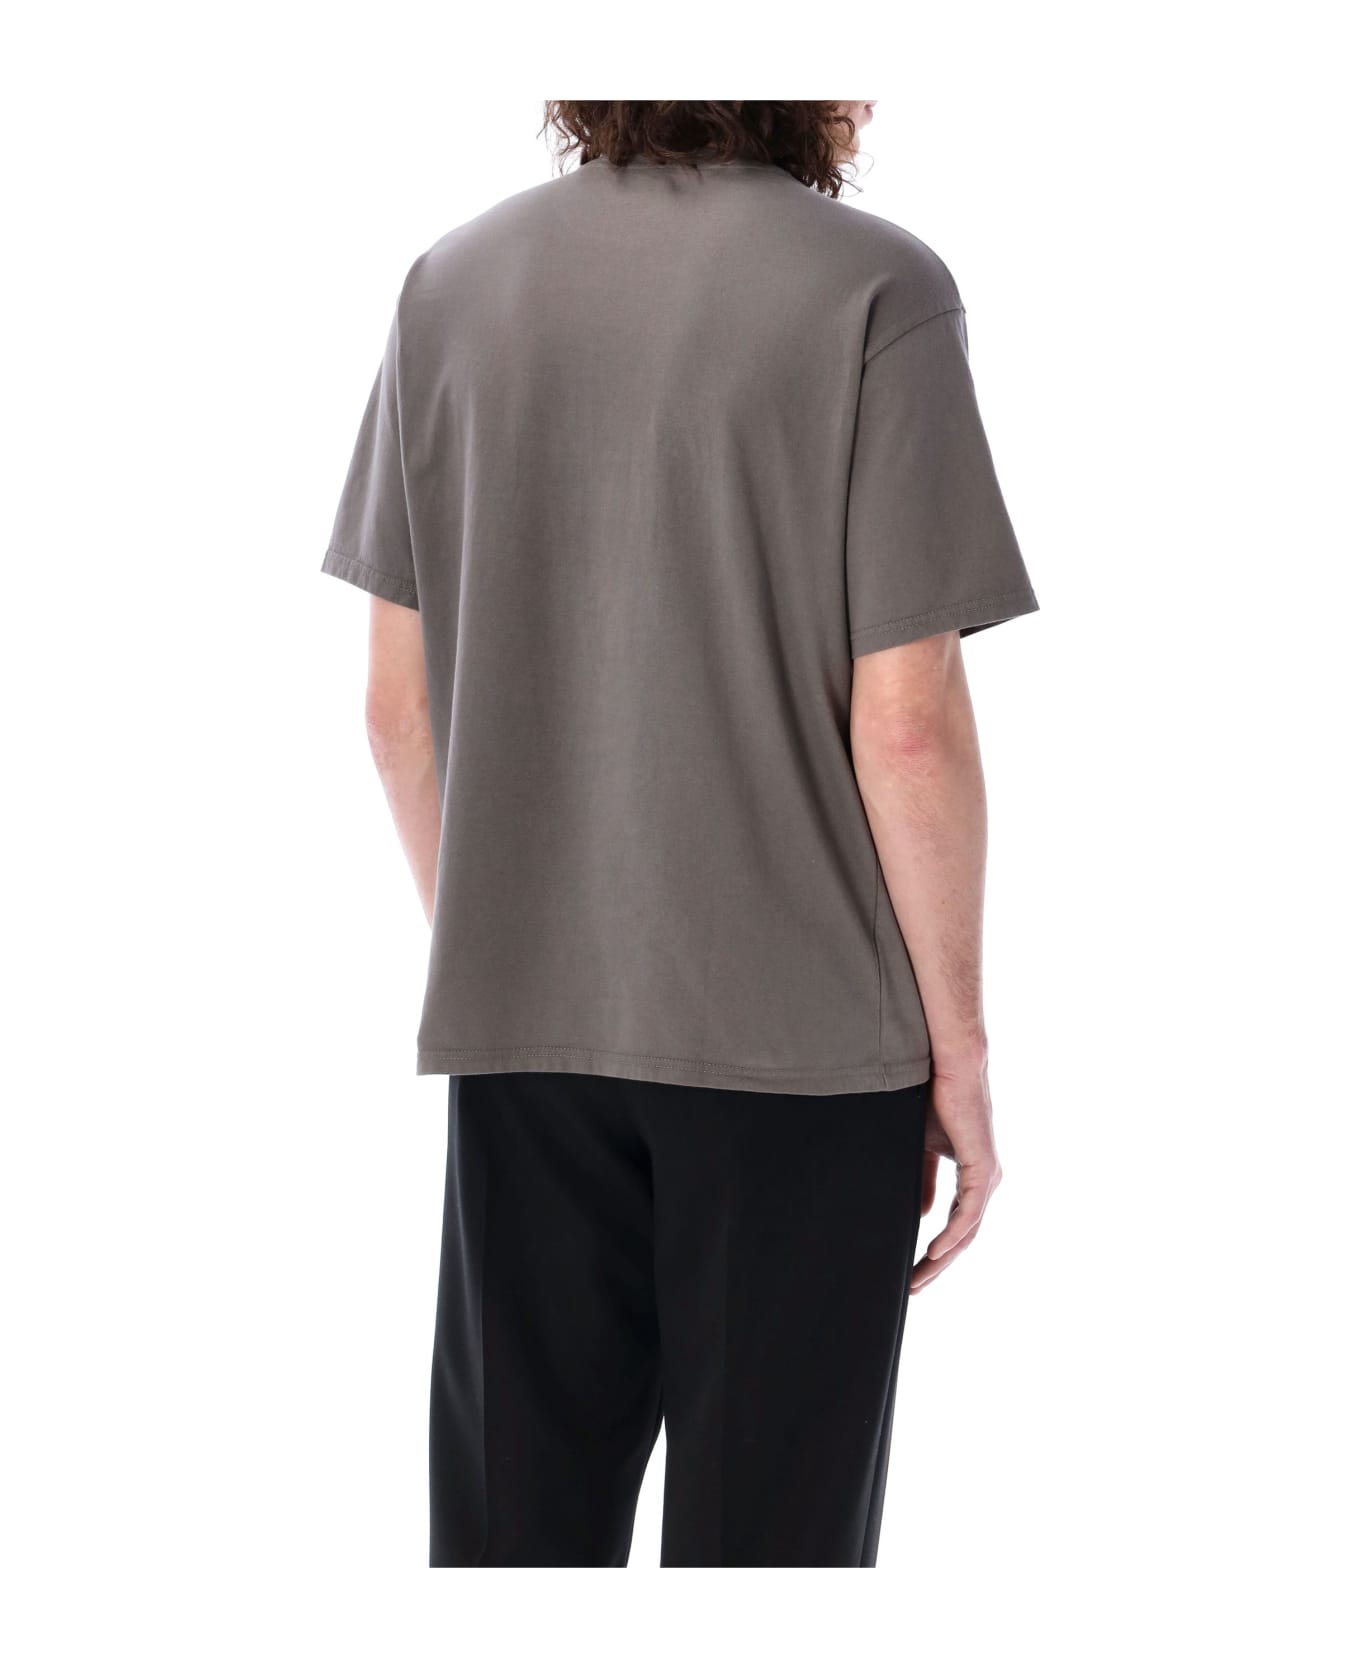 Undercover Jun Takahashi Embroidered T-shirt - GRAY シャツ